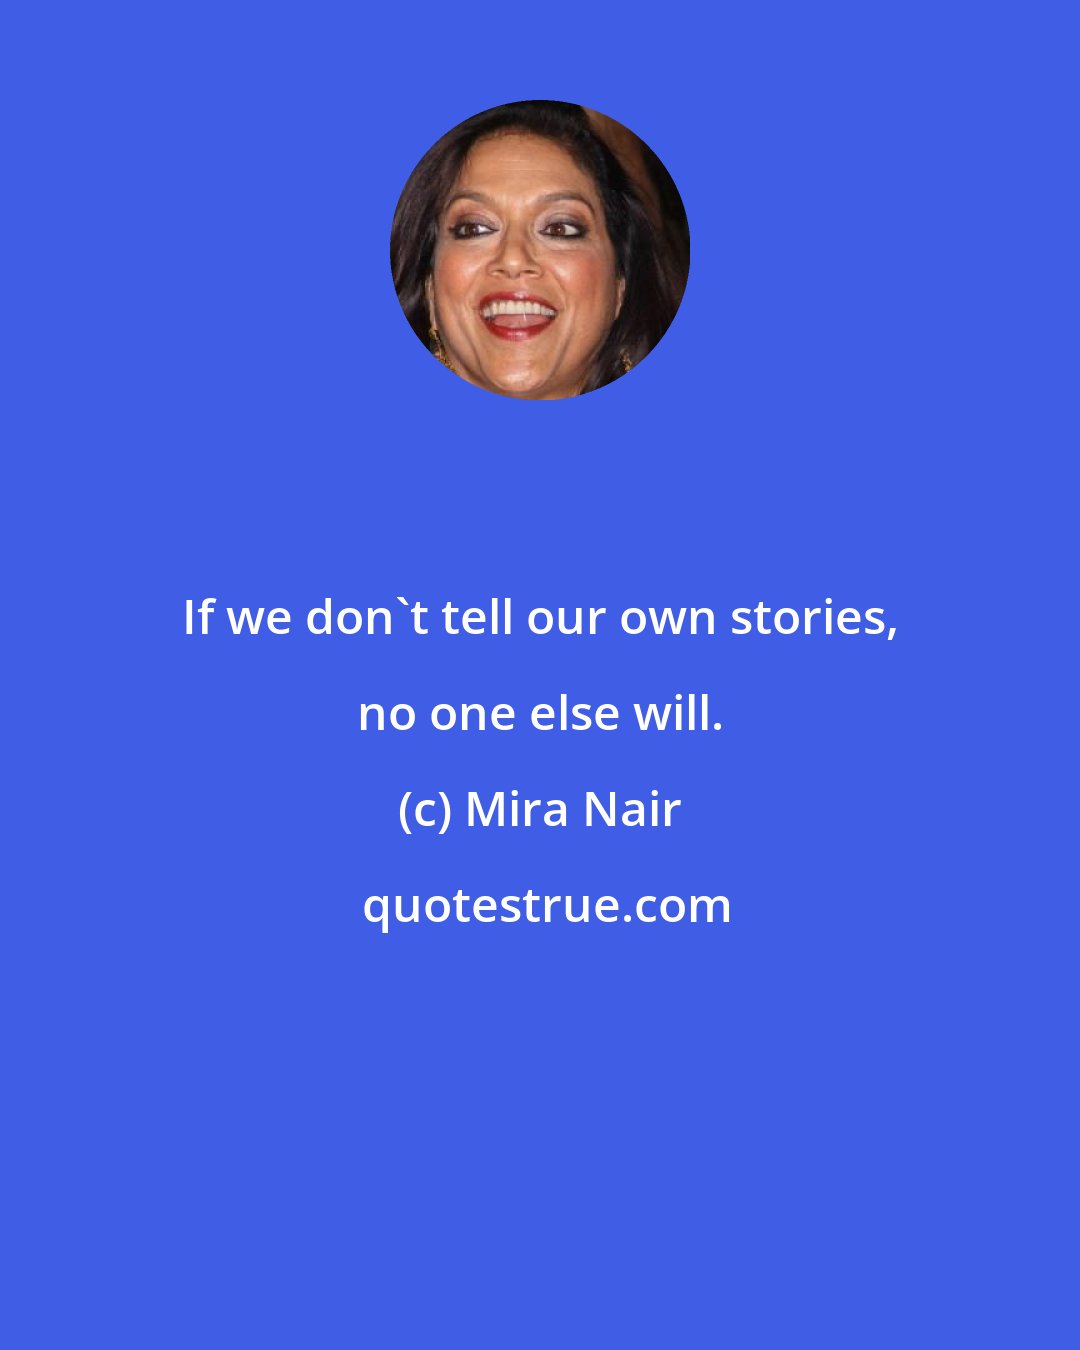 Mira Nair: If we don't tell our own stories, no one else will.